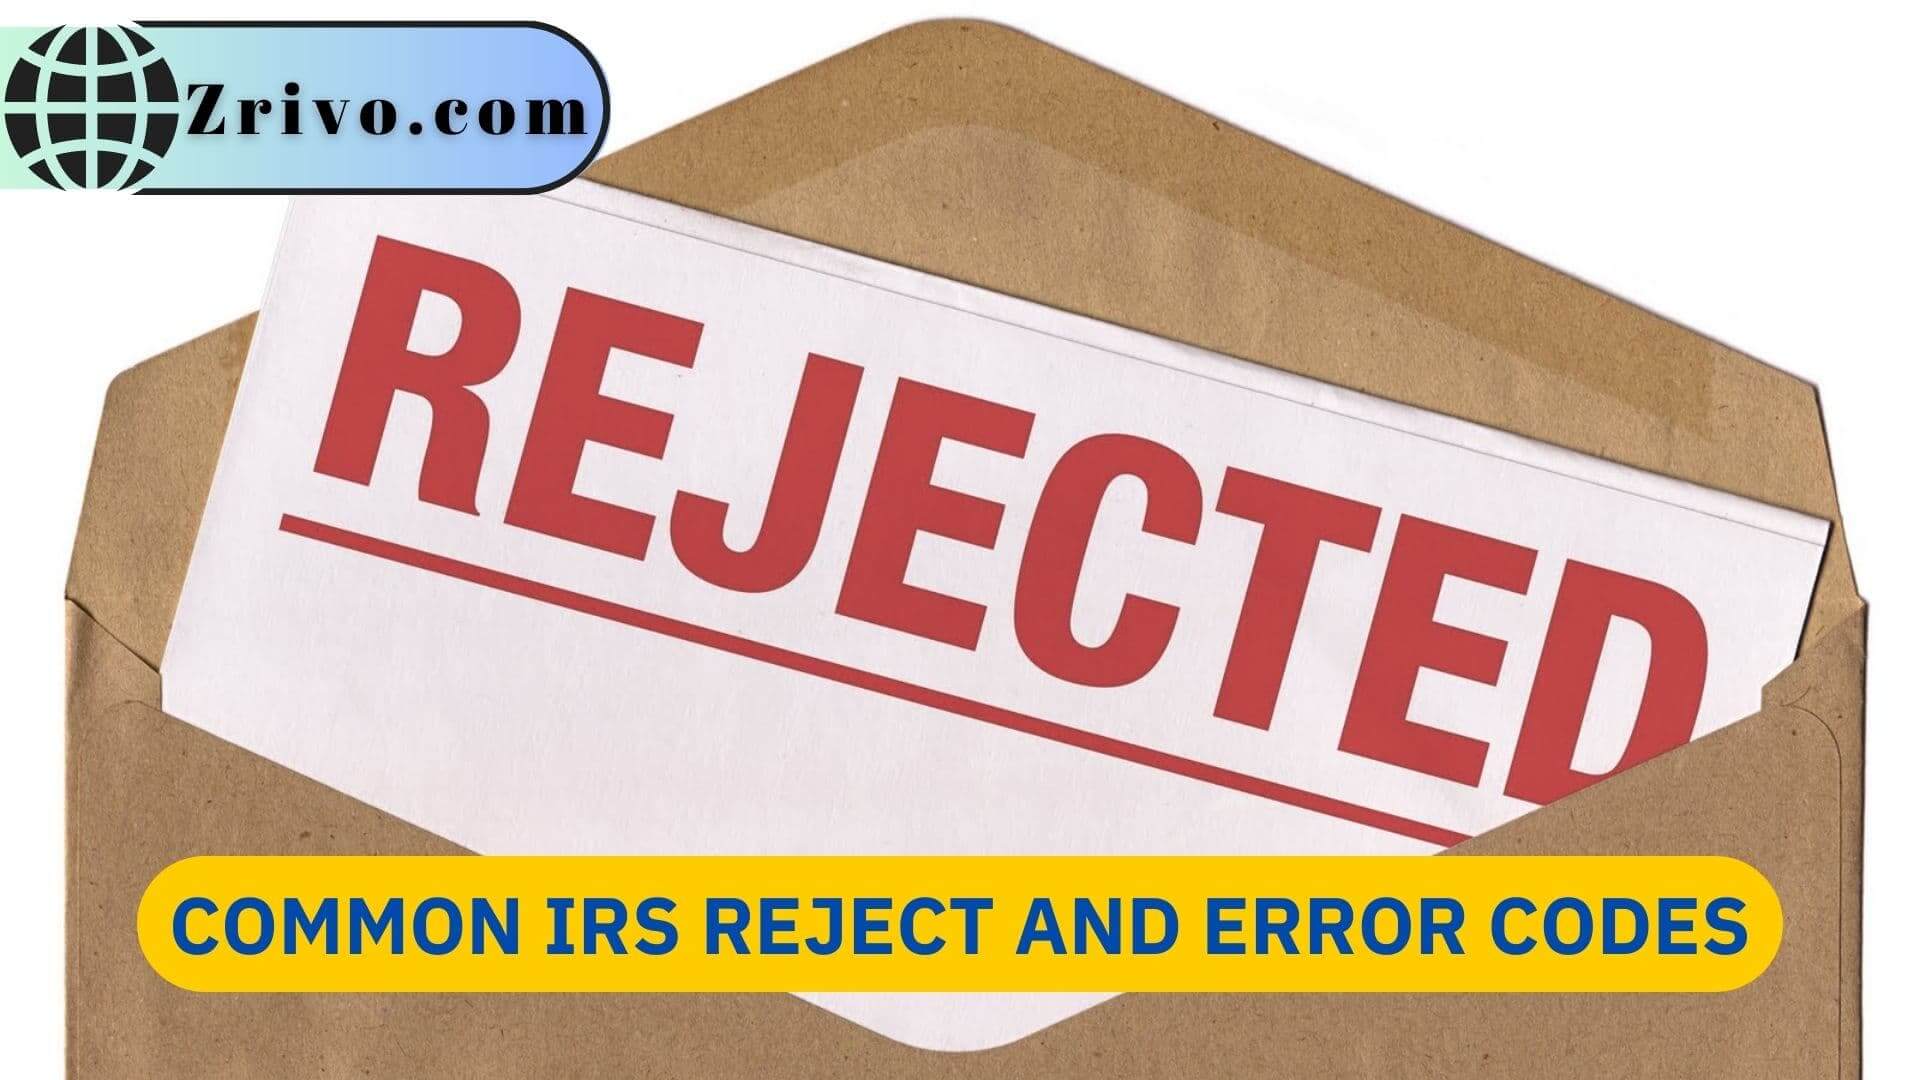 Common IRS Reject and Error Codes